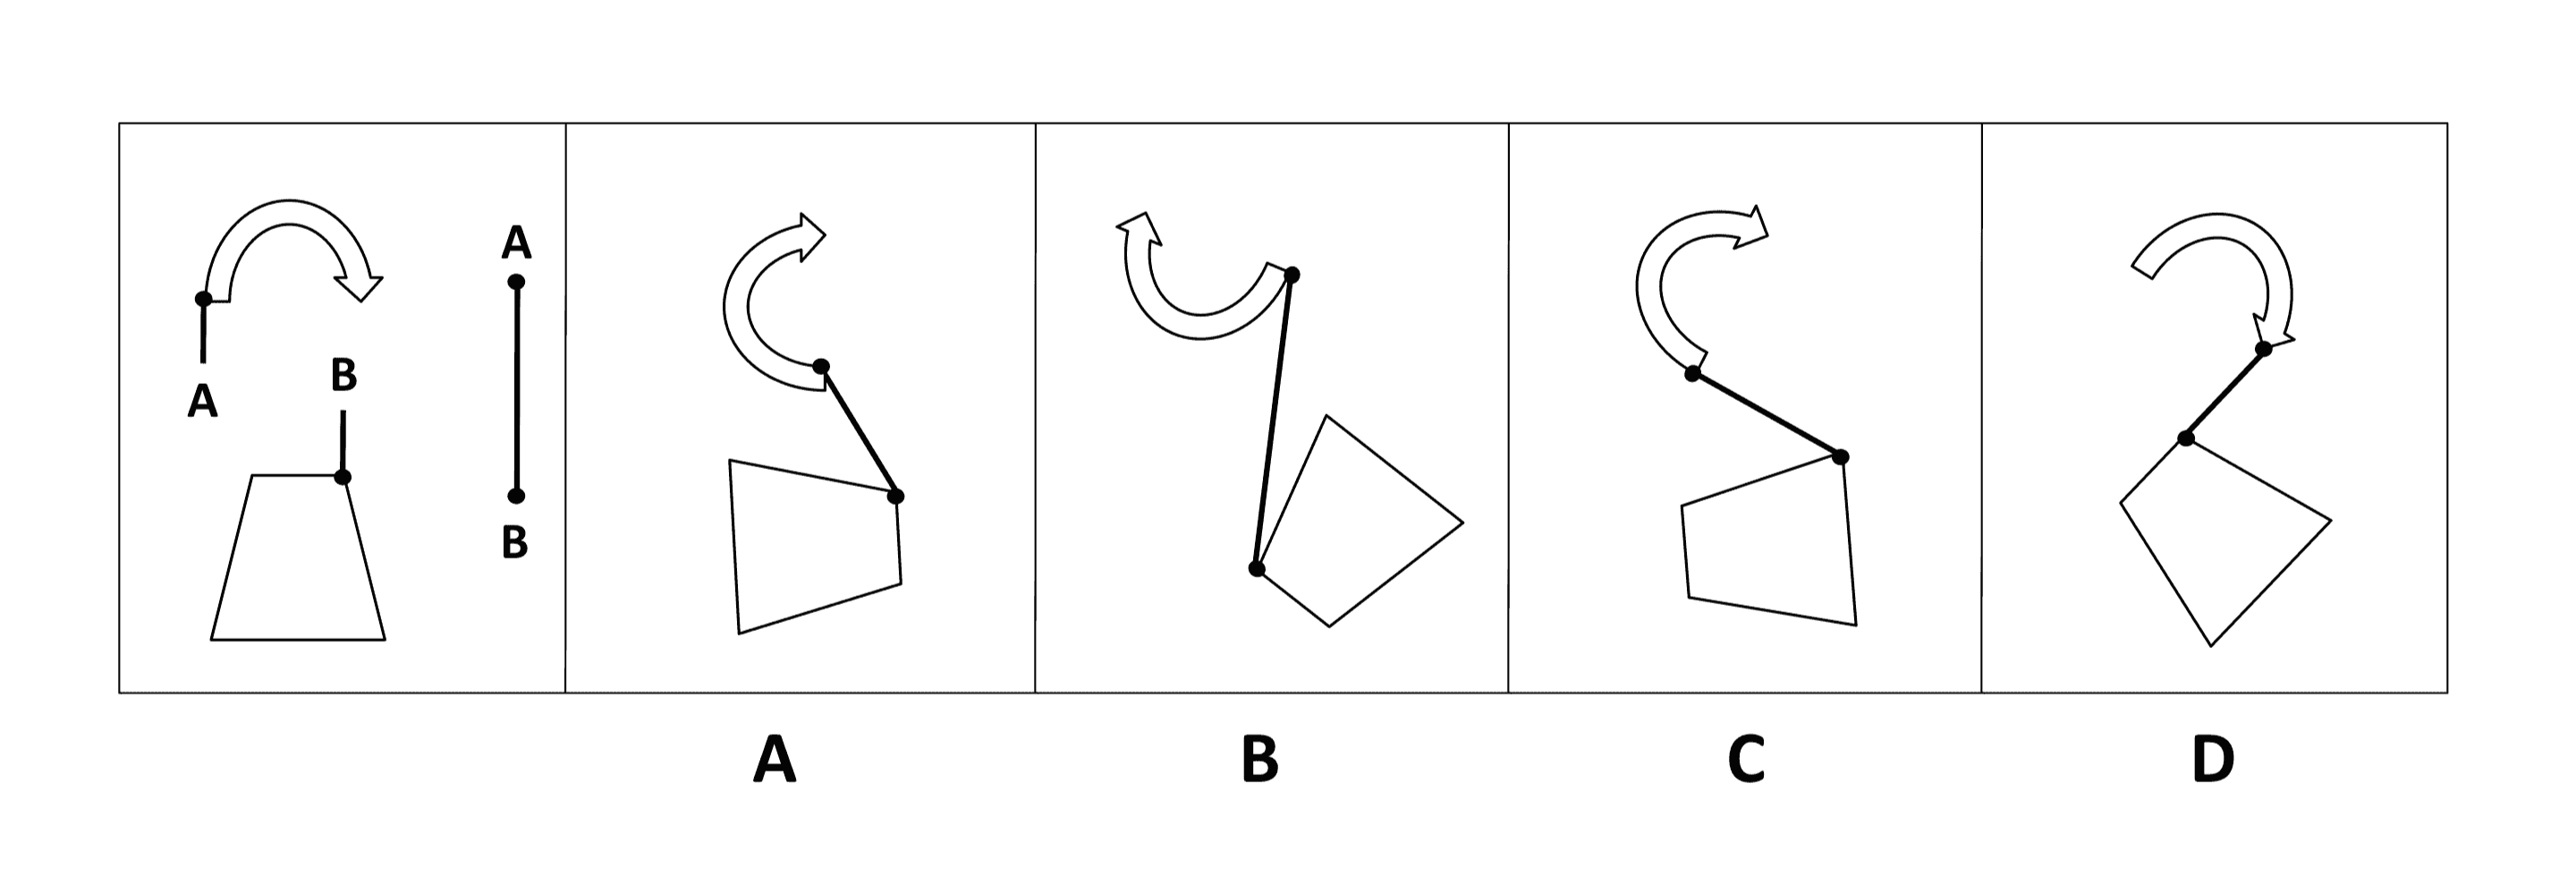 asvab assembling objects curved arrow and drum